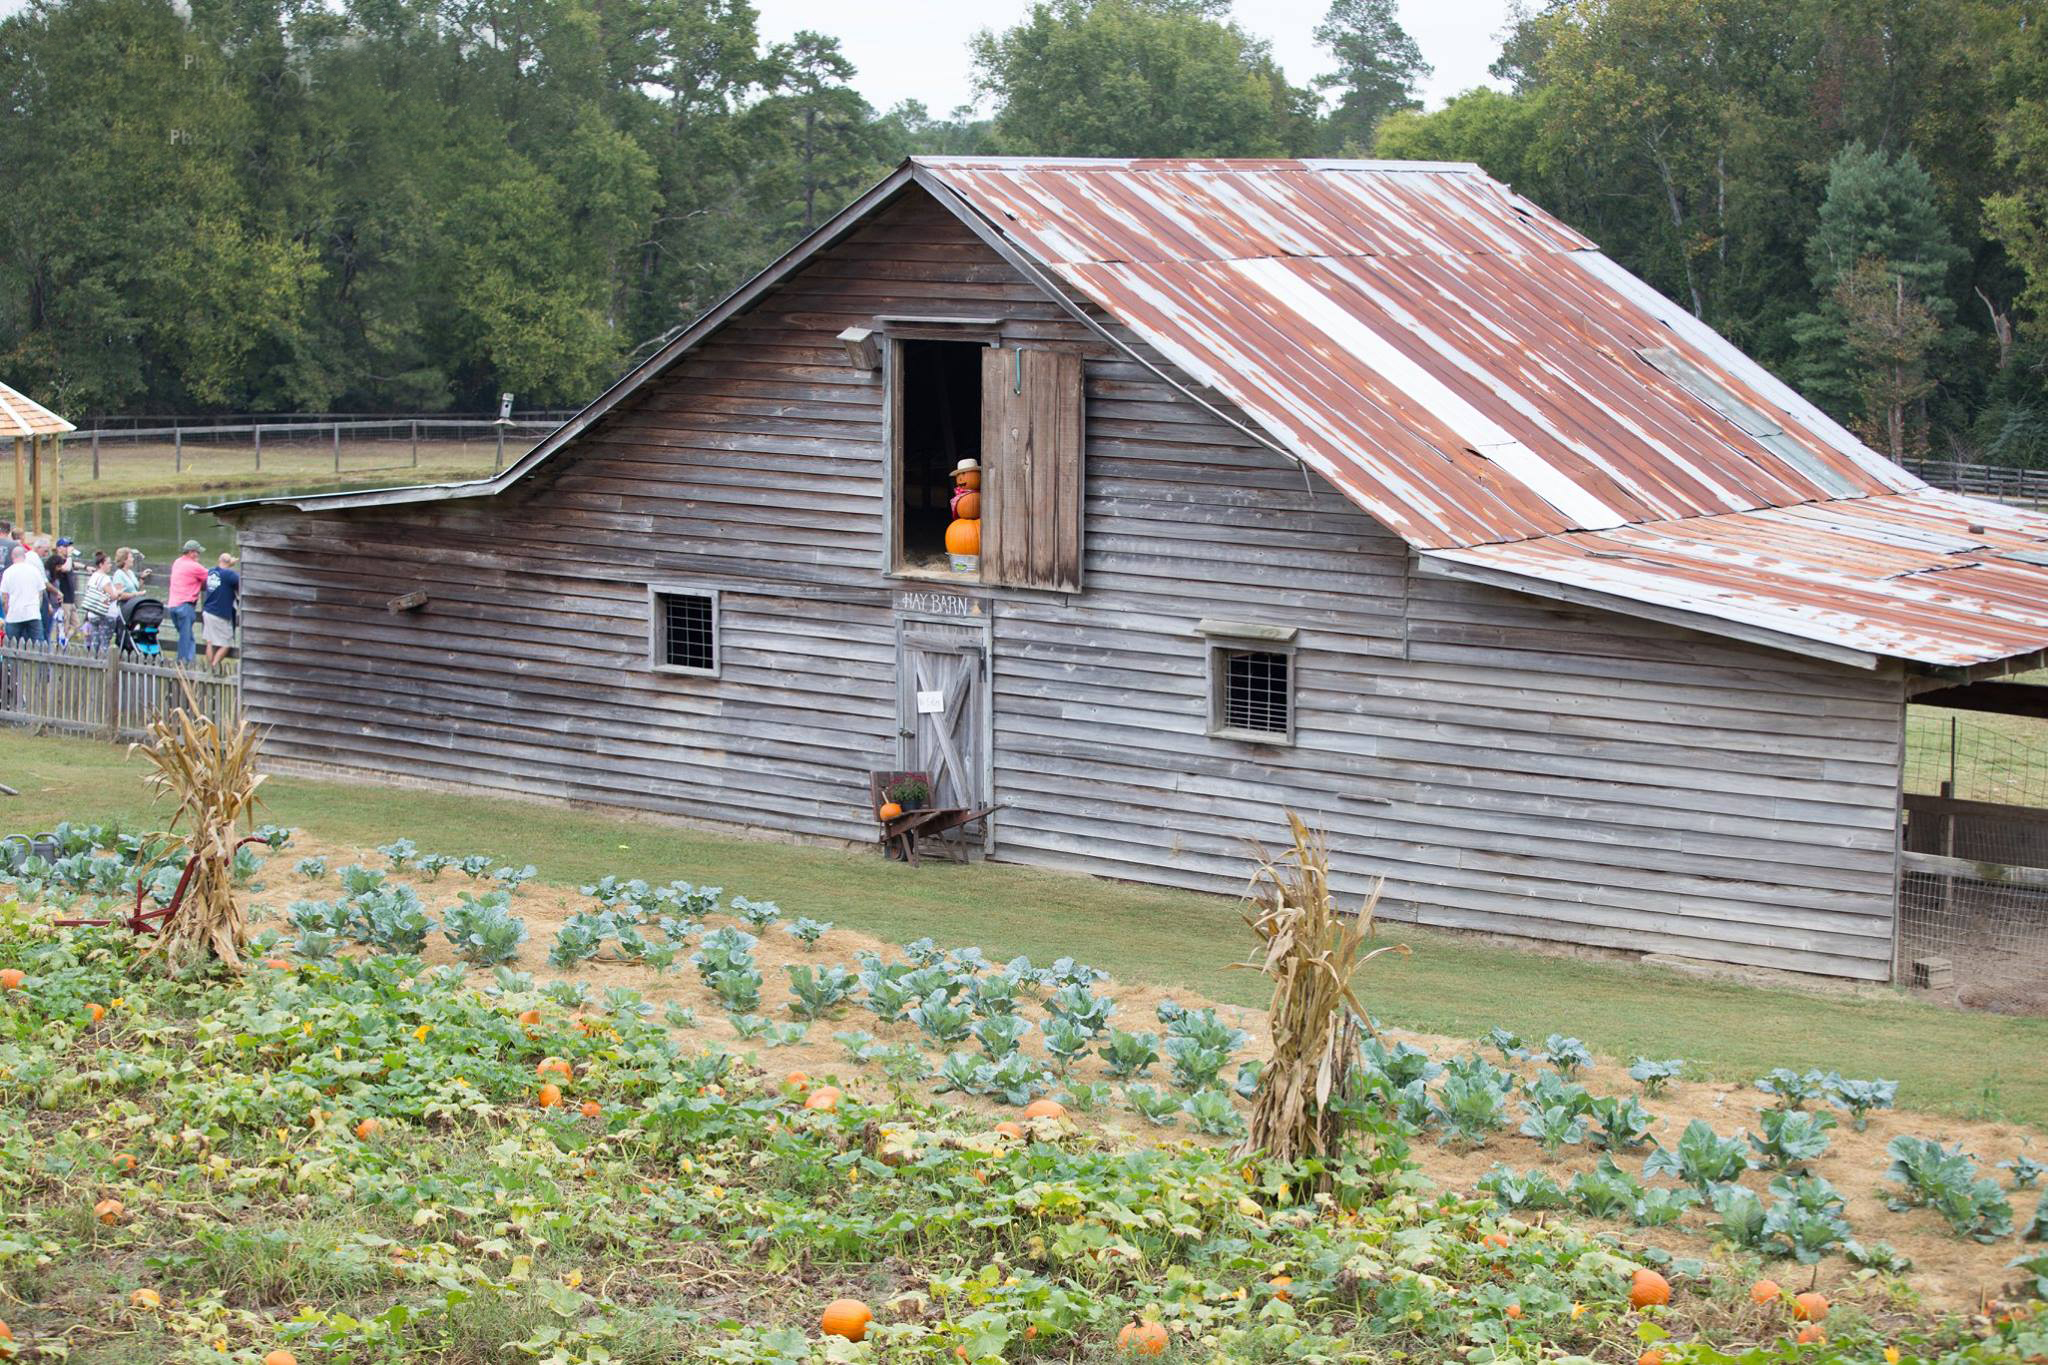 The McCaskills usually plant a fall garden and have pumpkins. Photography courtesy of Julie Jackson Prickett